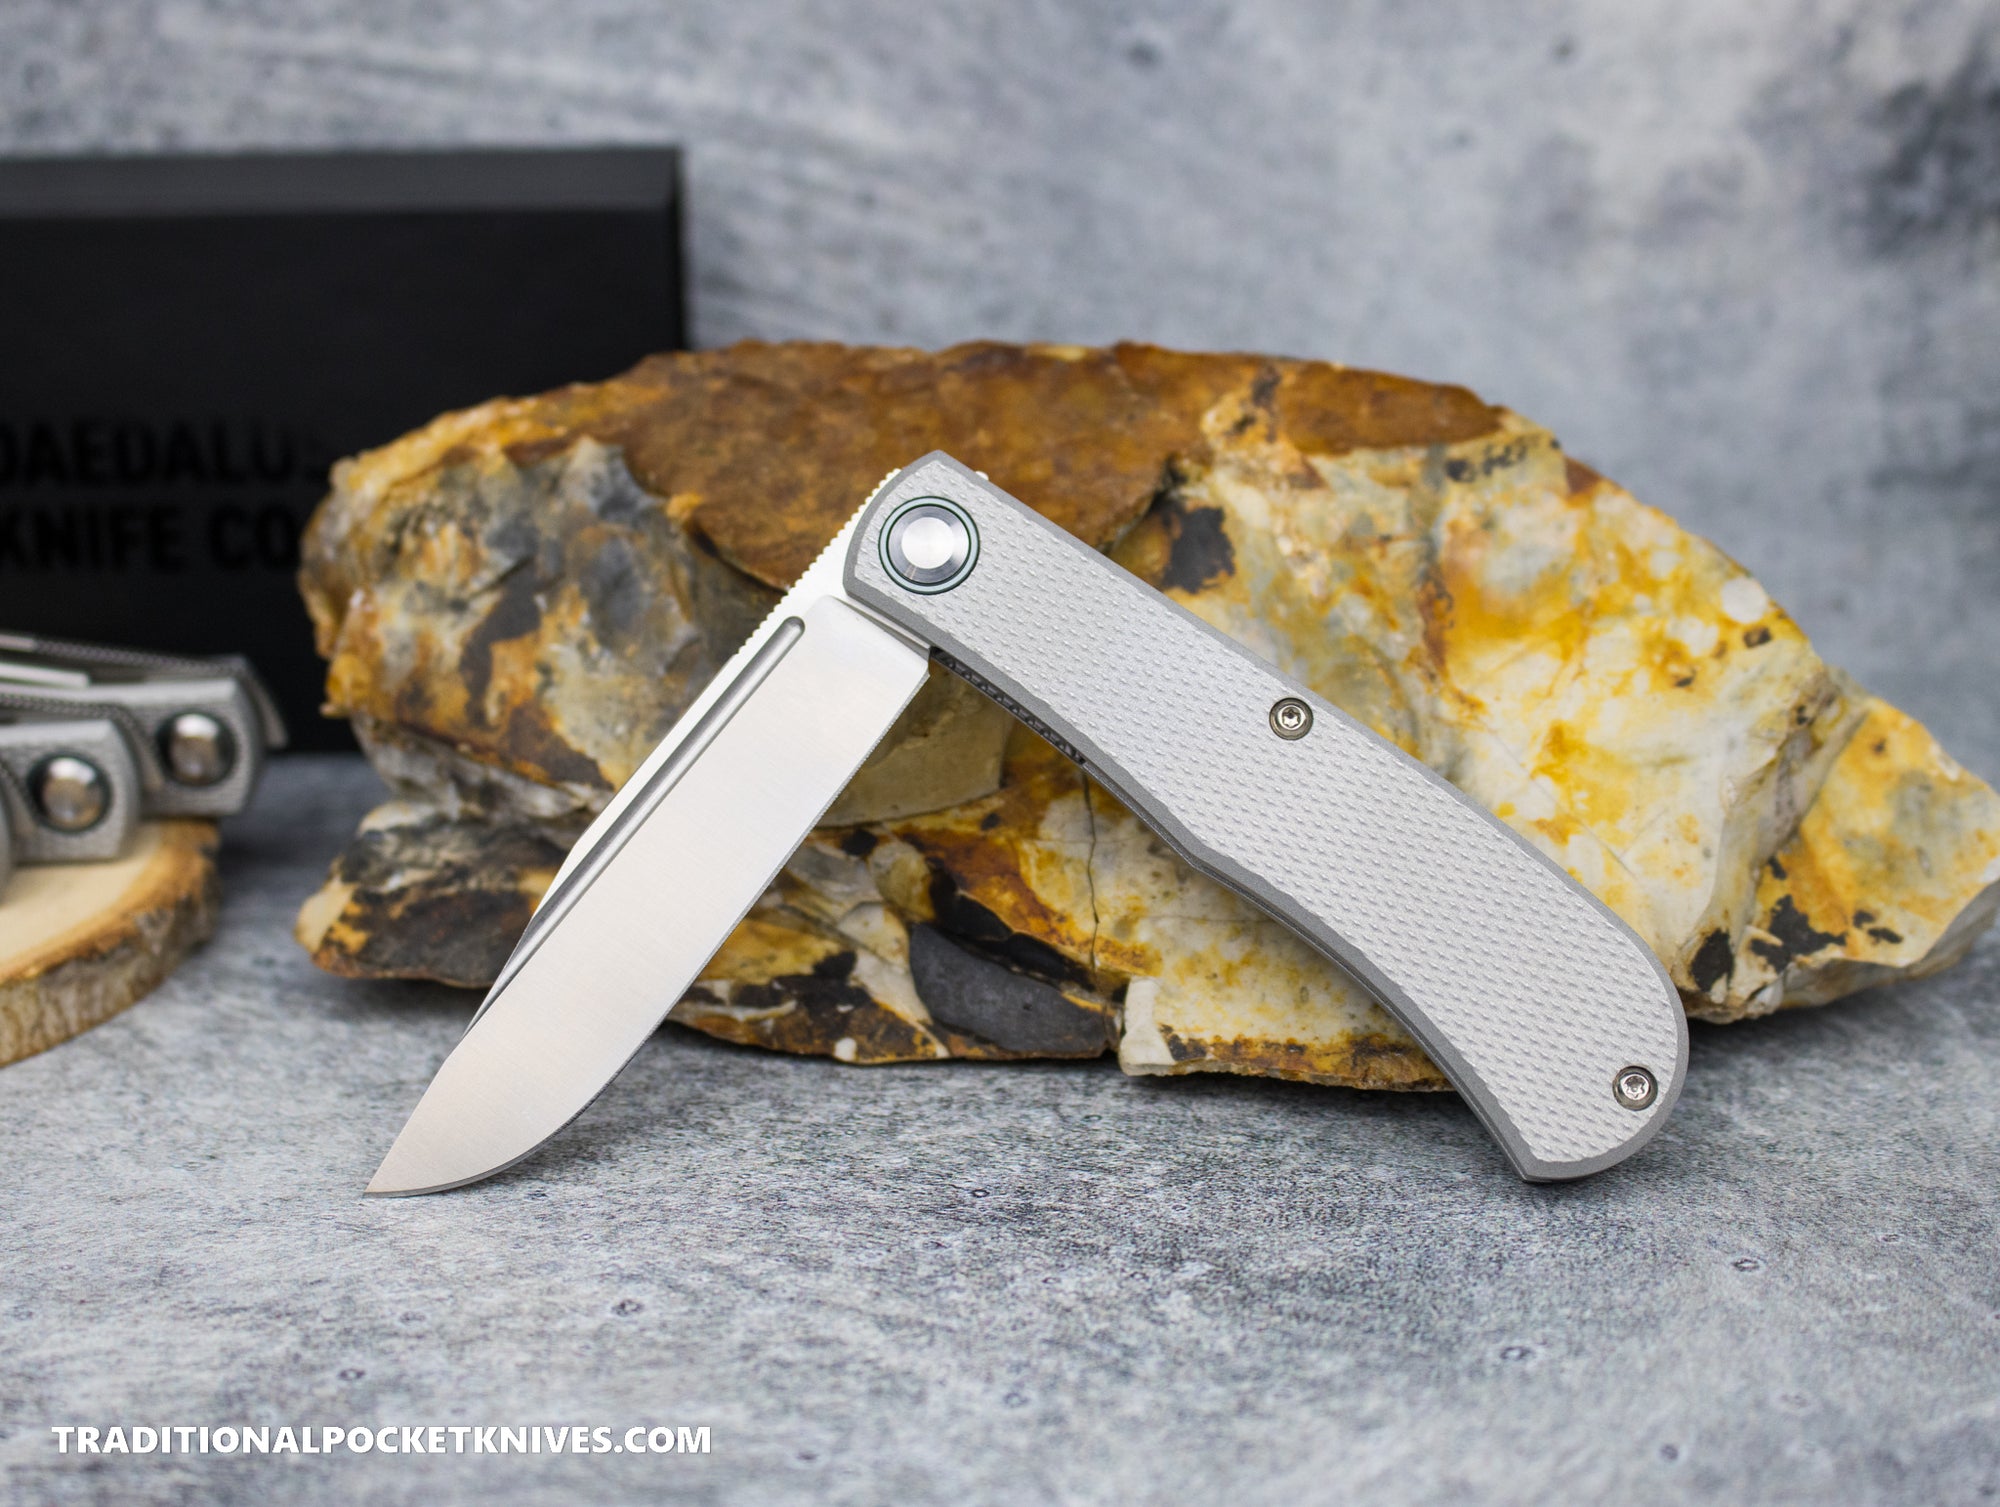 Daedalus Knife Co. "The Lab" Blasted and Tumbled Checkered Gray Aluminum